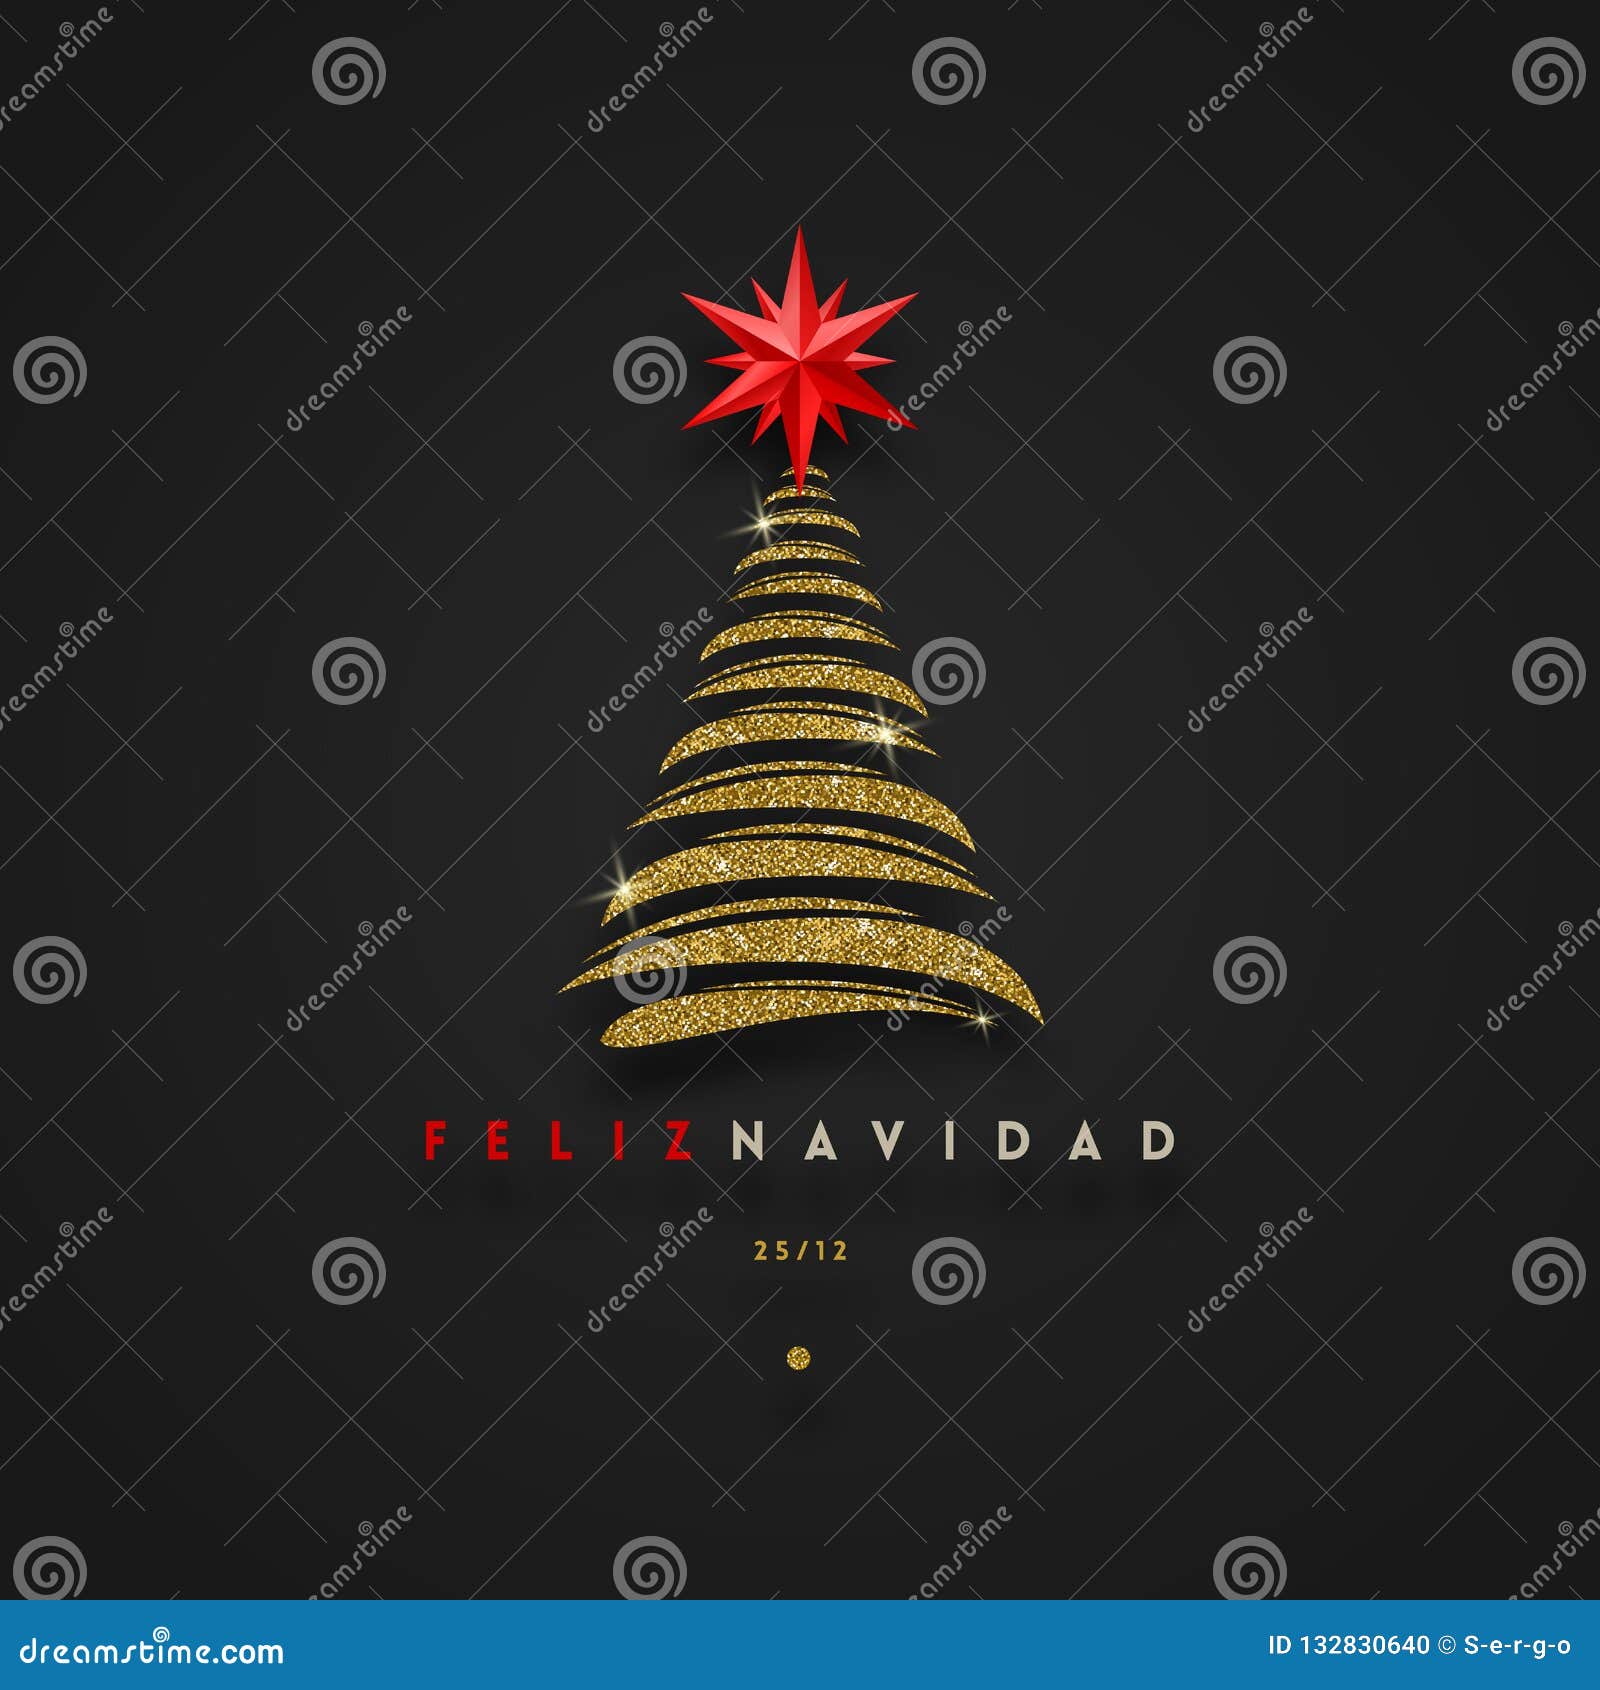 feliz navidad - christmas greetings in spanish - abstract glitter gold christmas tree with red star.